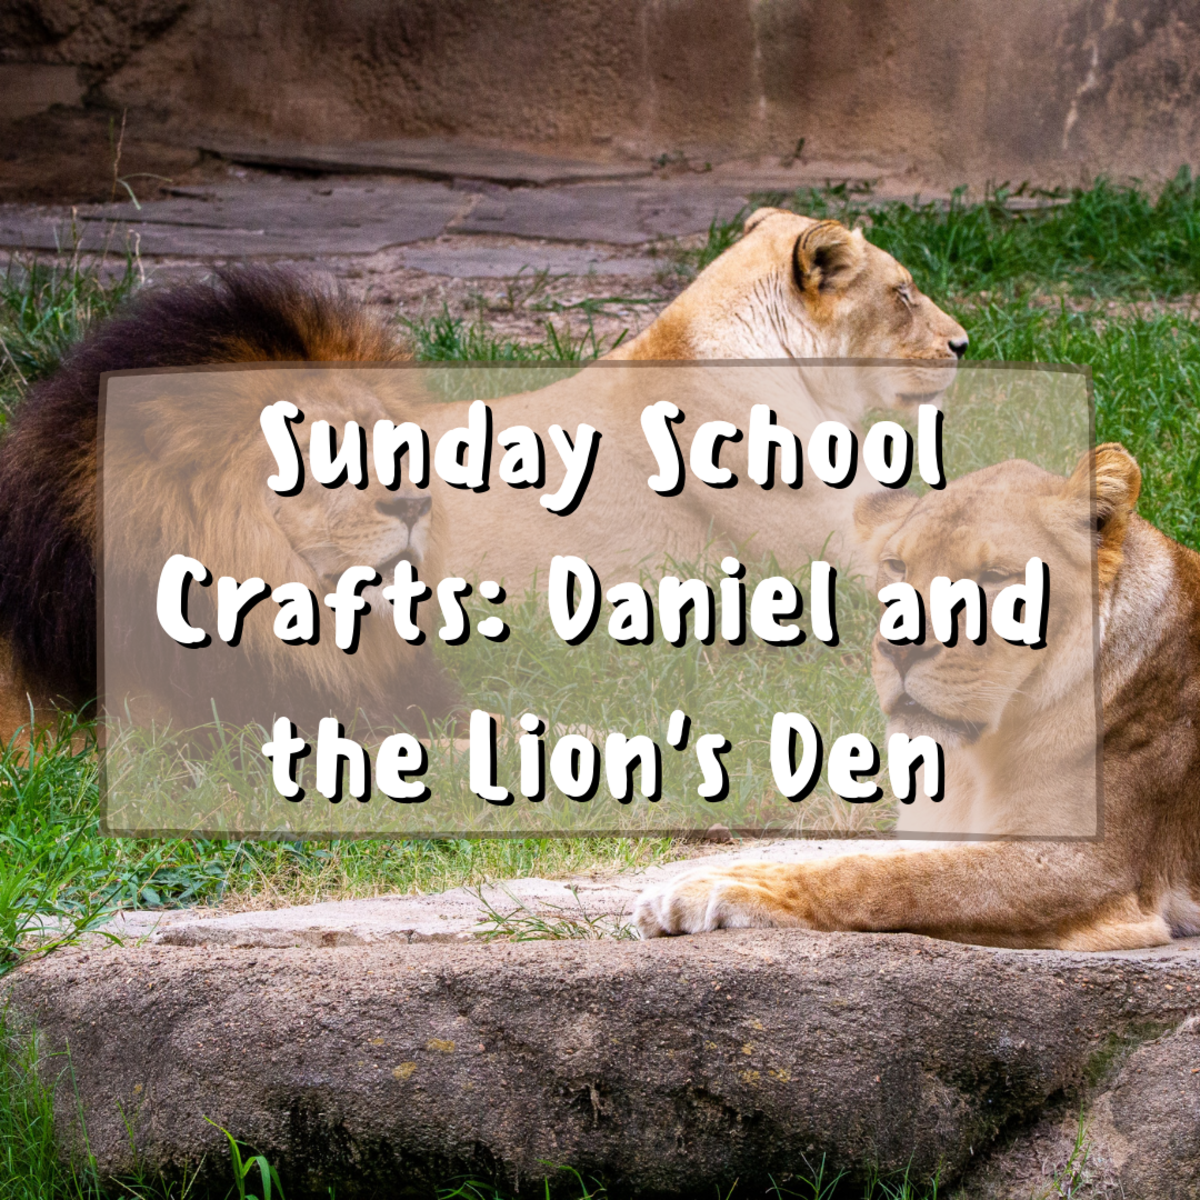 This article teaches you how to teach two fun, inexpensive, and engaging crafts for children that reinforce the lessons from the story of Daniel in the Lion's den. These crafts require minimal adult supervision.